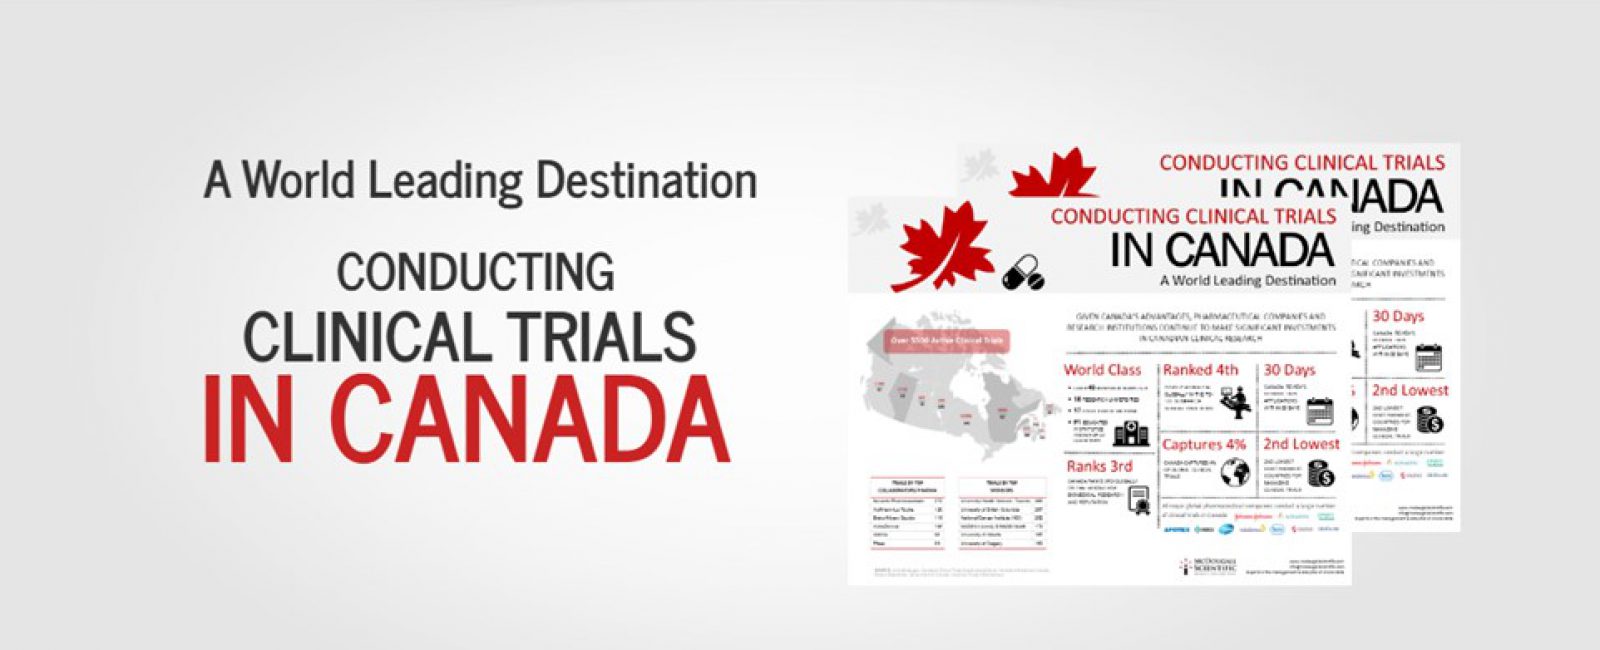 Canada as a world leading destination for Clinical Trials